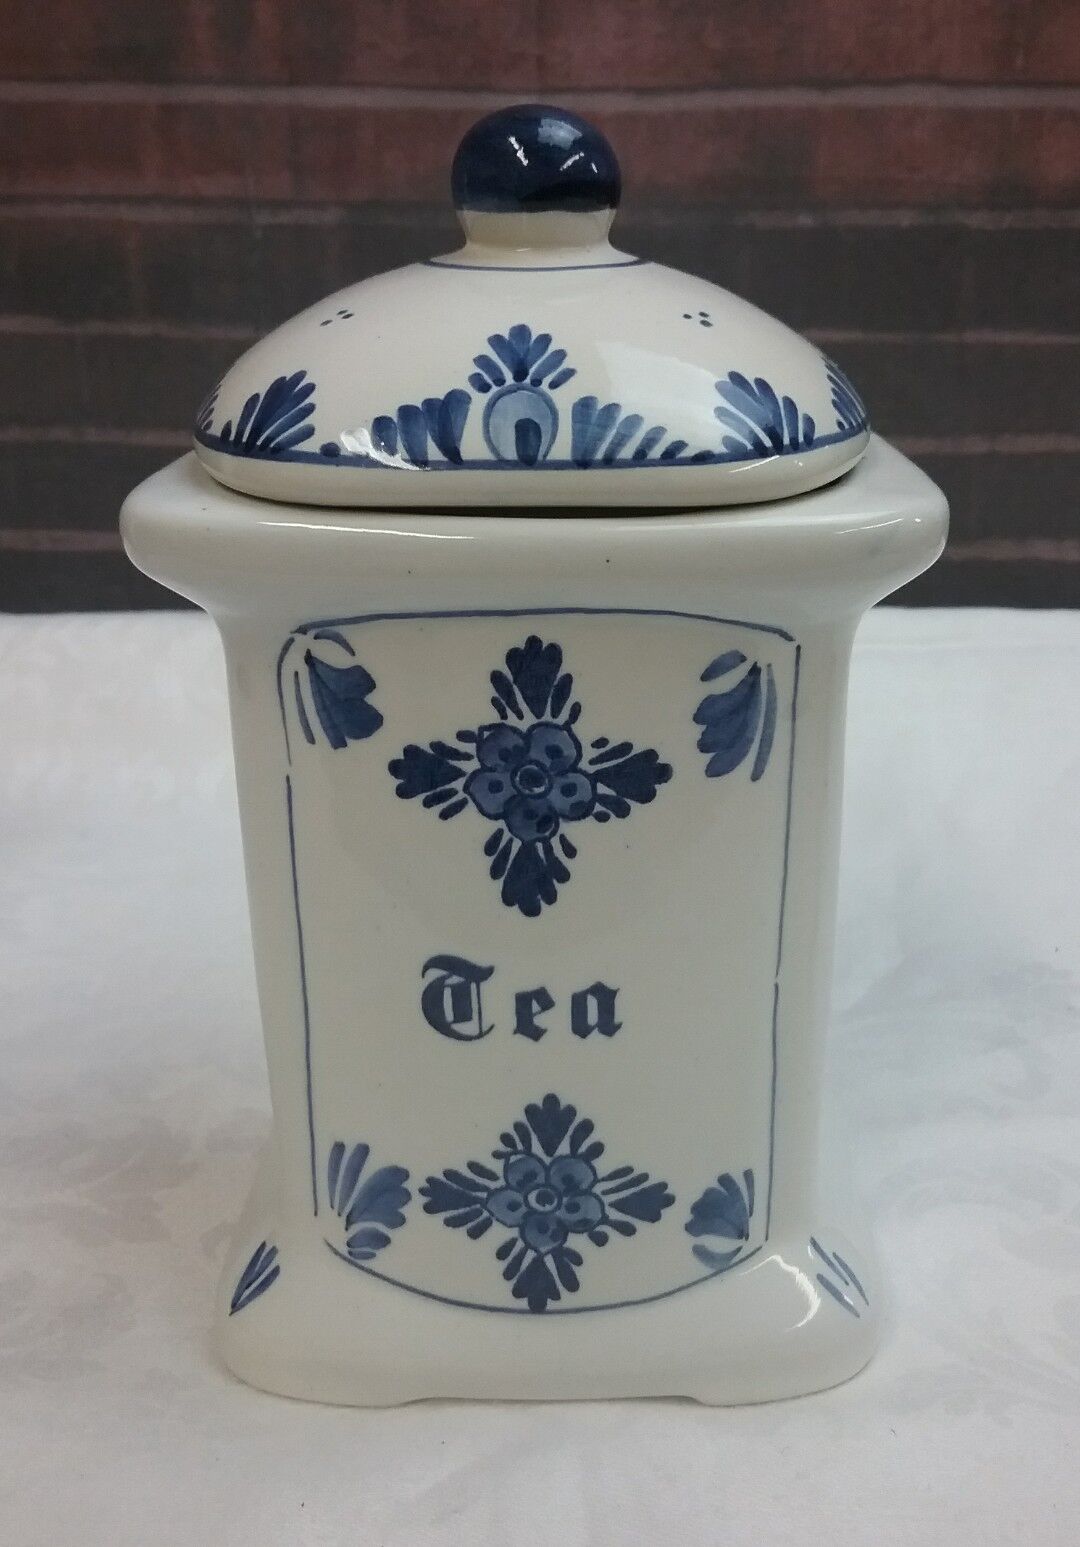 Tea Canister Caddy Ceramic Handpainted Blue & White Floral Design w/Cover SIGNED